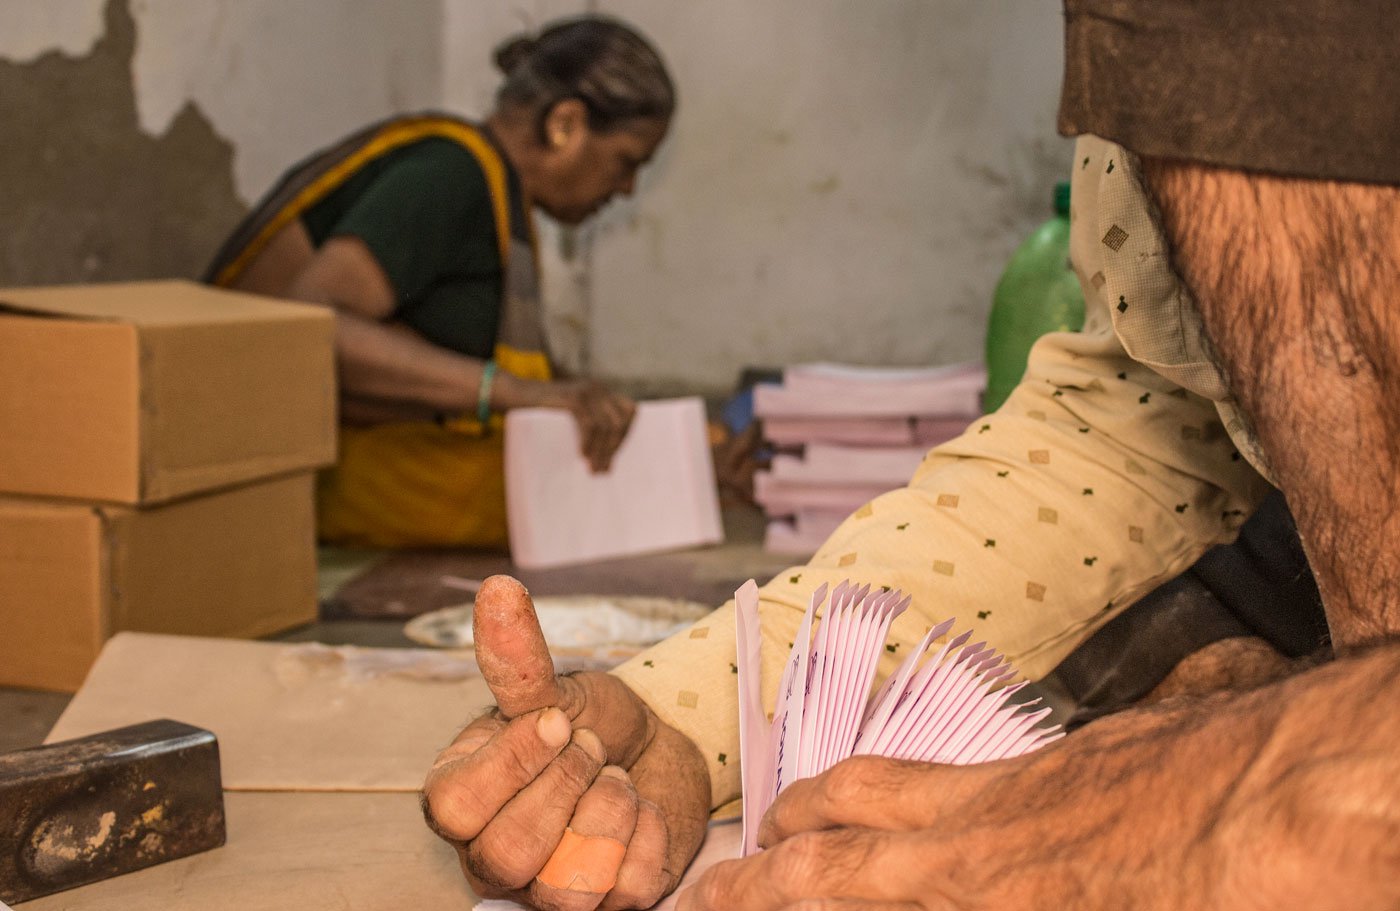 An envelope goes through 16 rounds in the hands of a worker during the entire process and the chances of getting your fingers cut, are high. Kaleem Sheikh shows his injured thumb